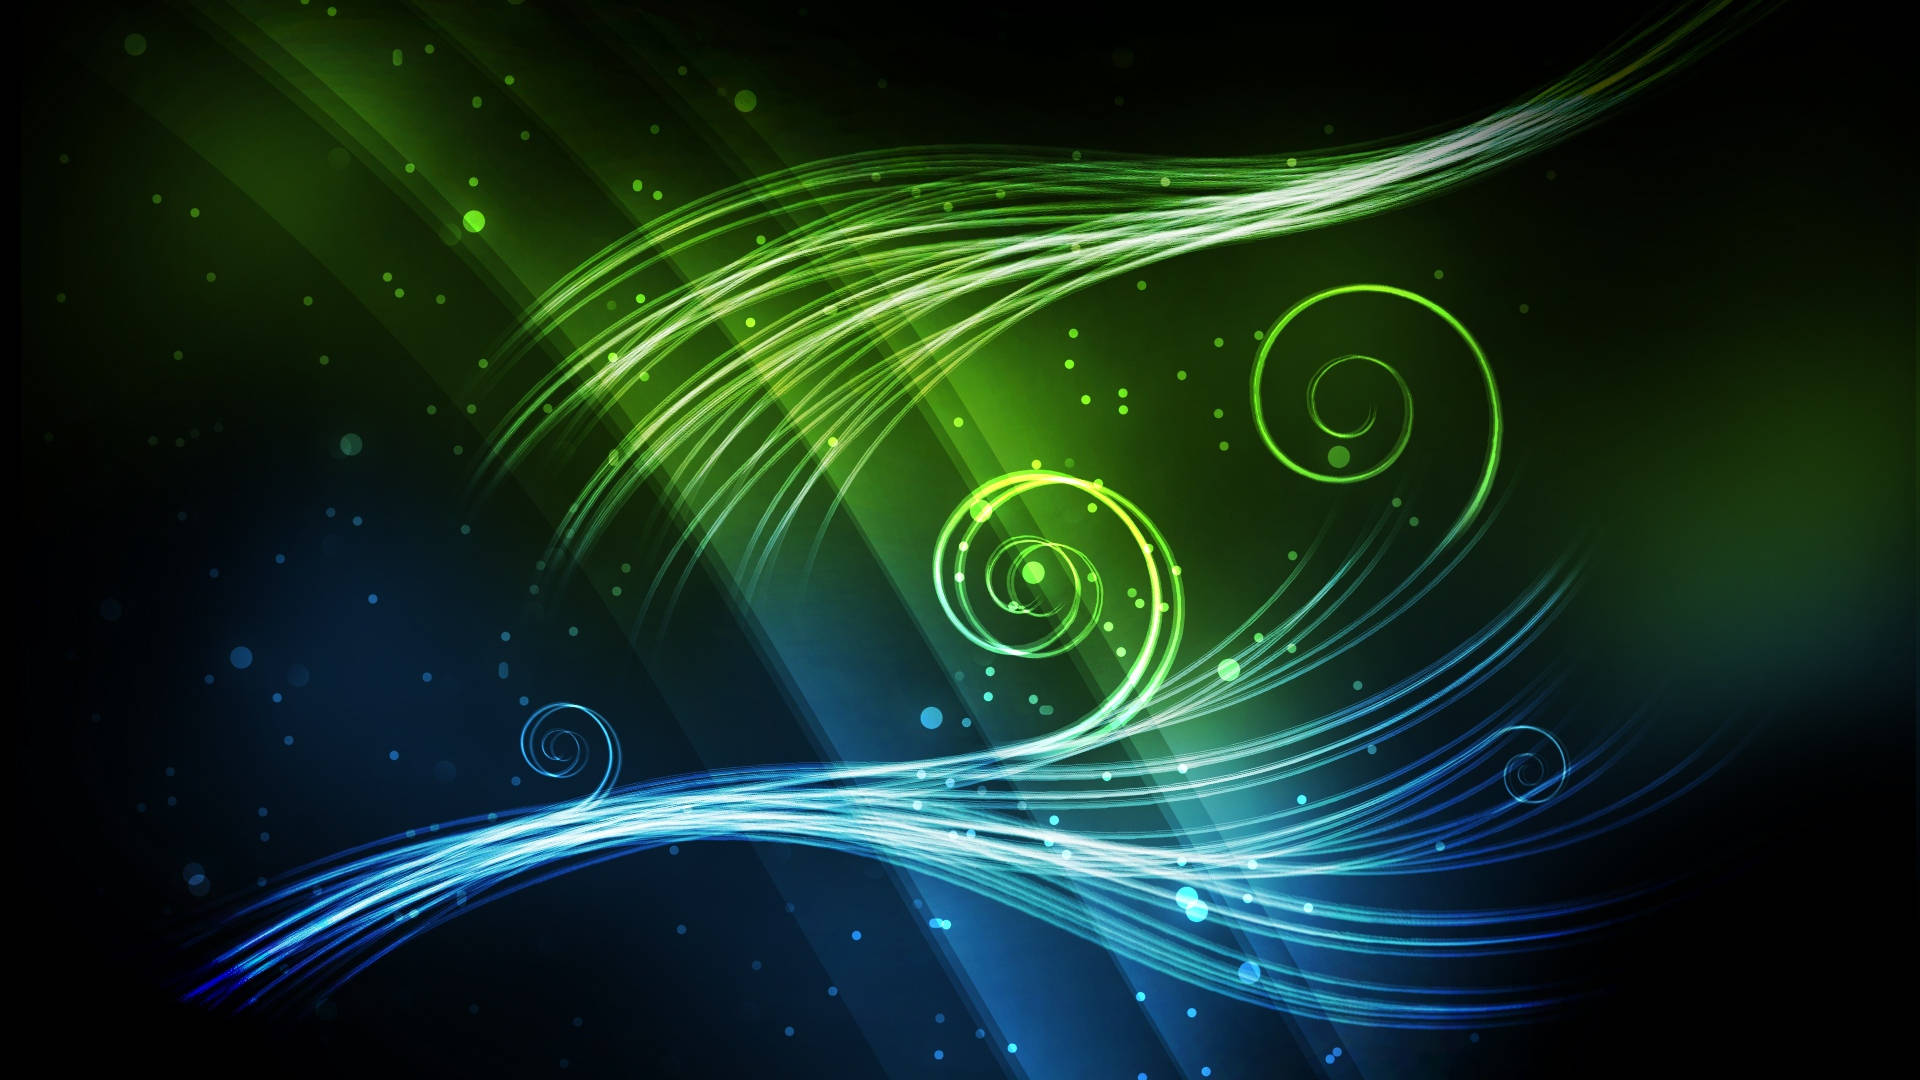 Blue And Green Abstract Wallpaper